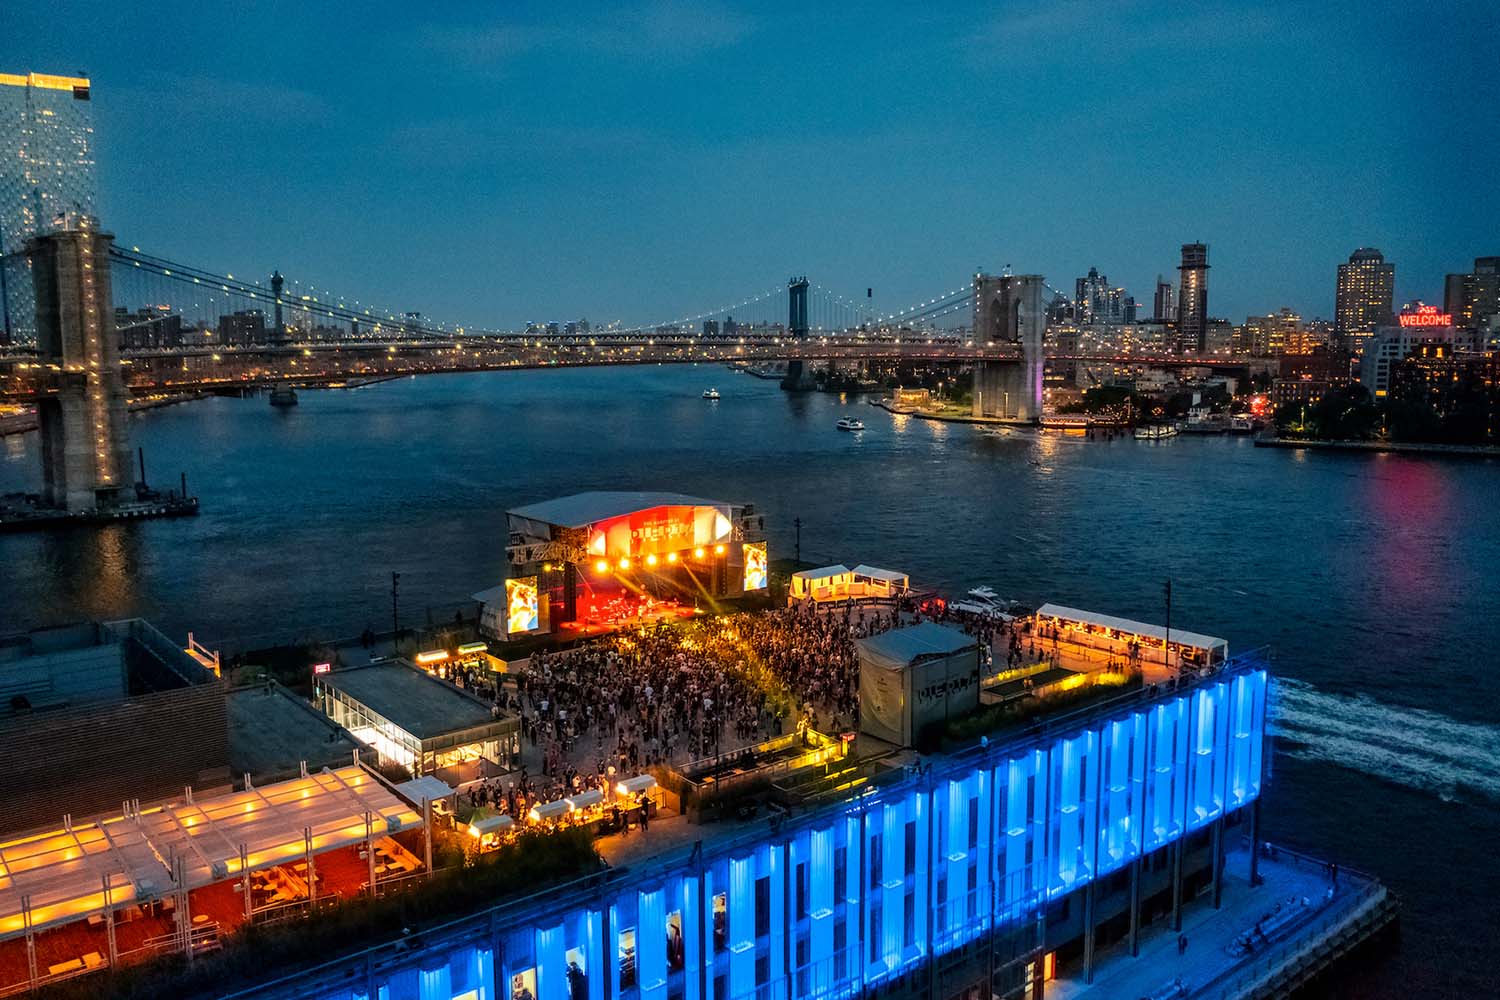 The Rooftop at Pier 17